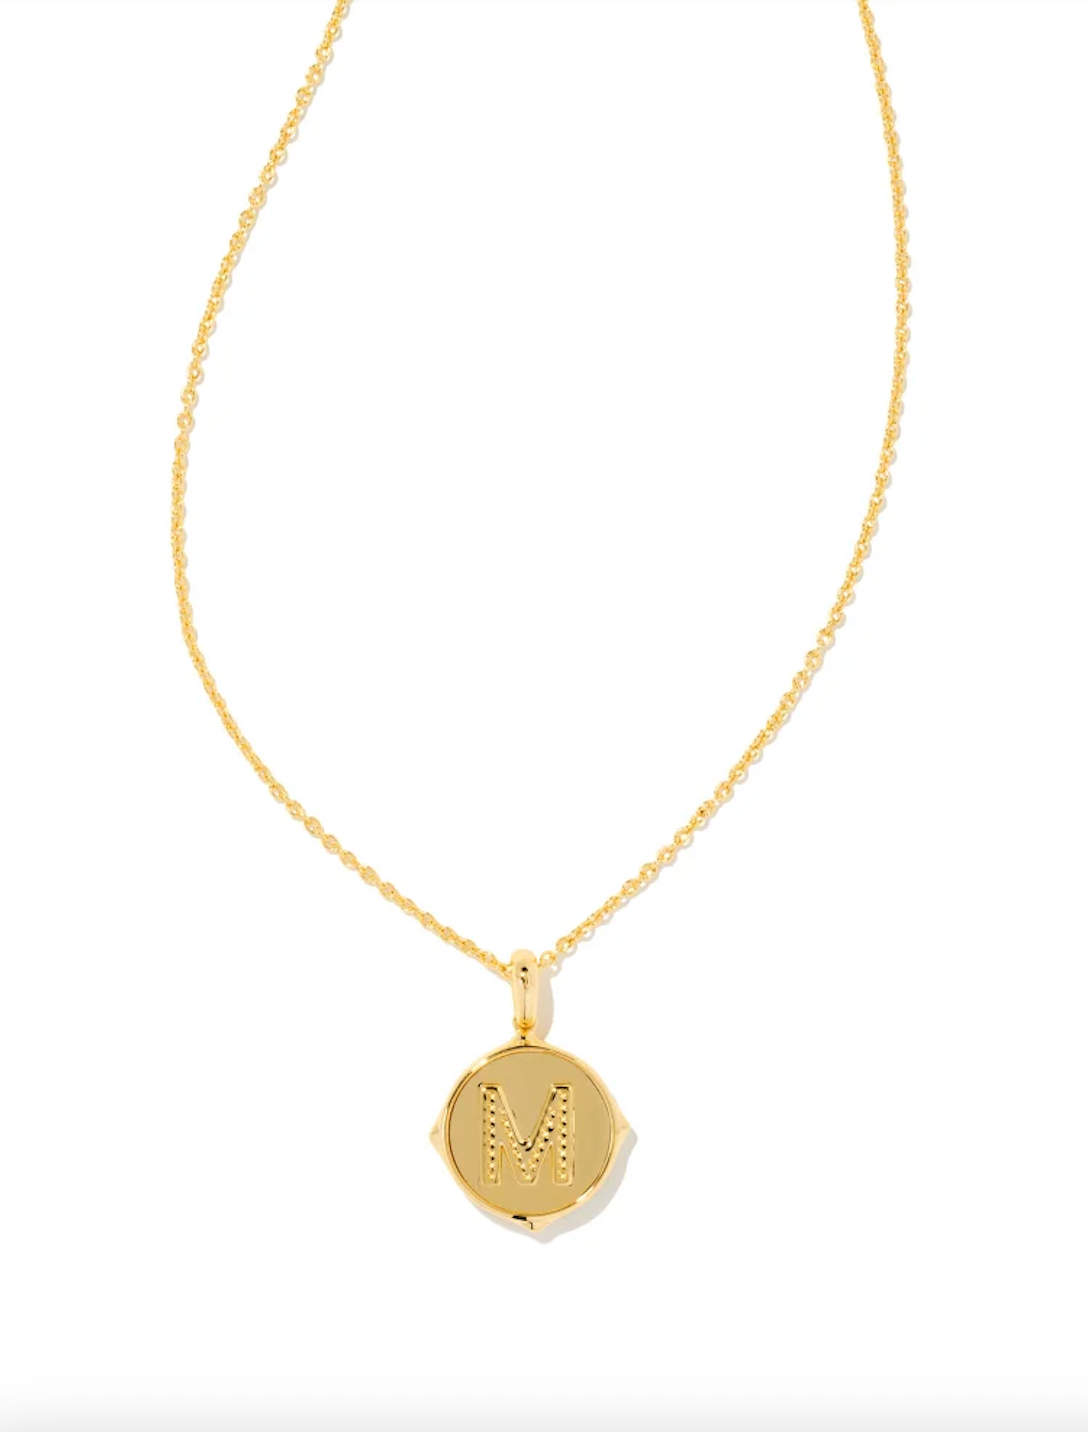 KENDRA SCOTT LETTER M PENDENT NECKLACE GOLD IRIDESCENT ABLONE